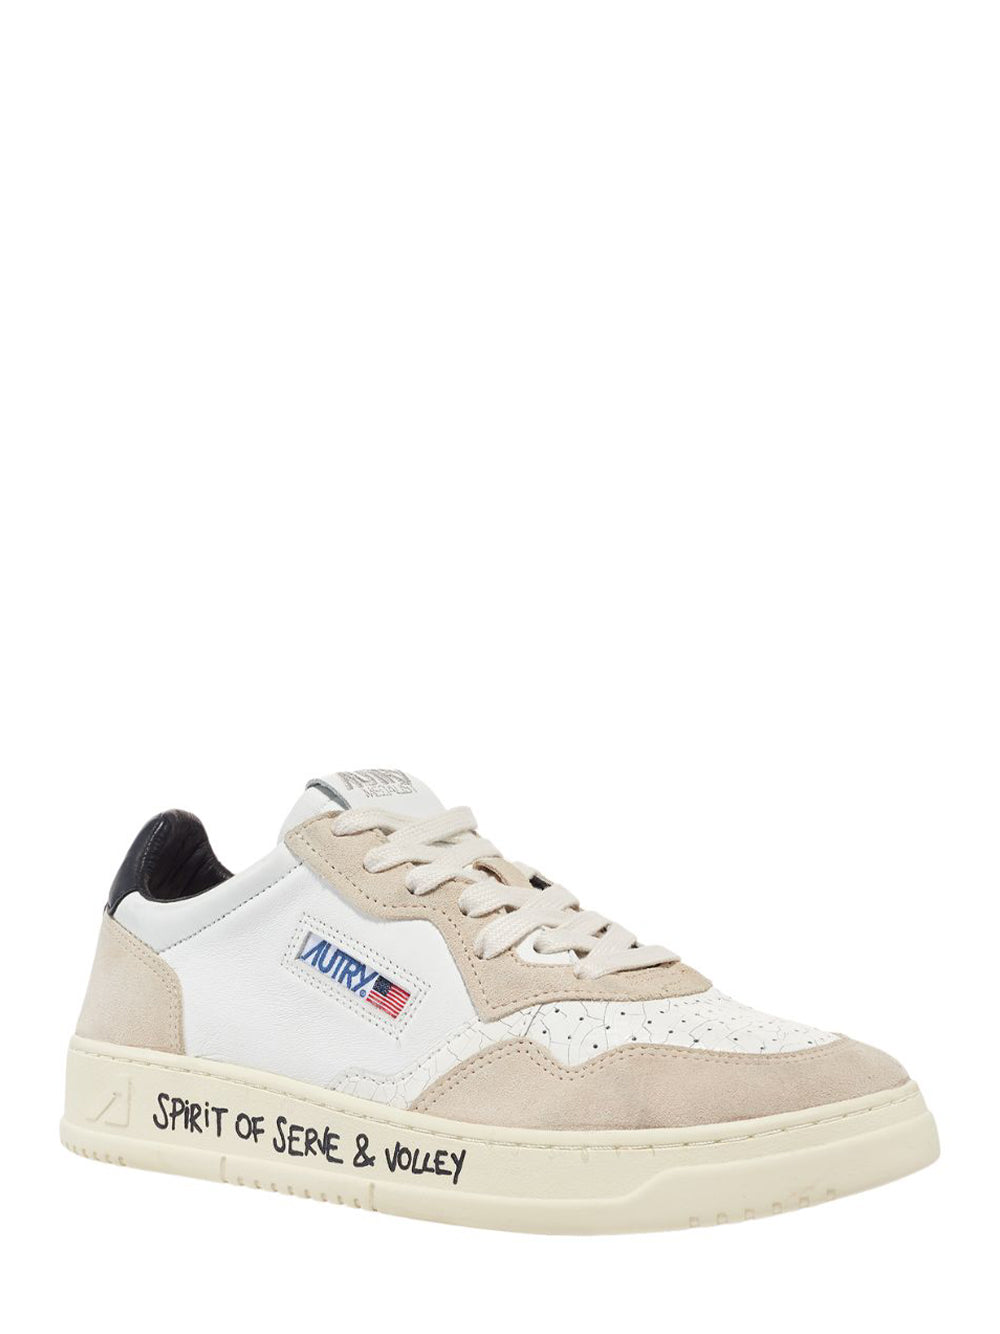 Medalist Low Sneakers In Suede And Leather Color (White And Black) (Women)